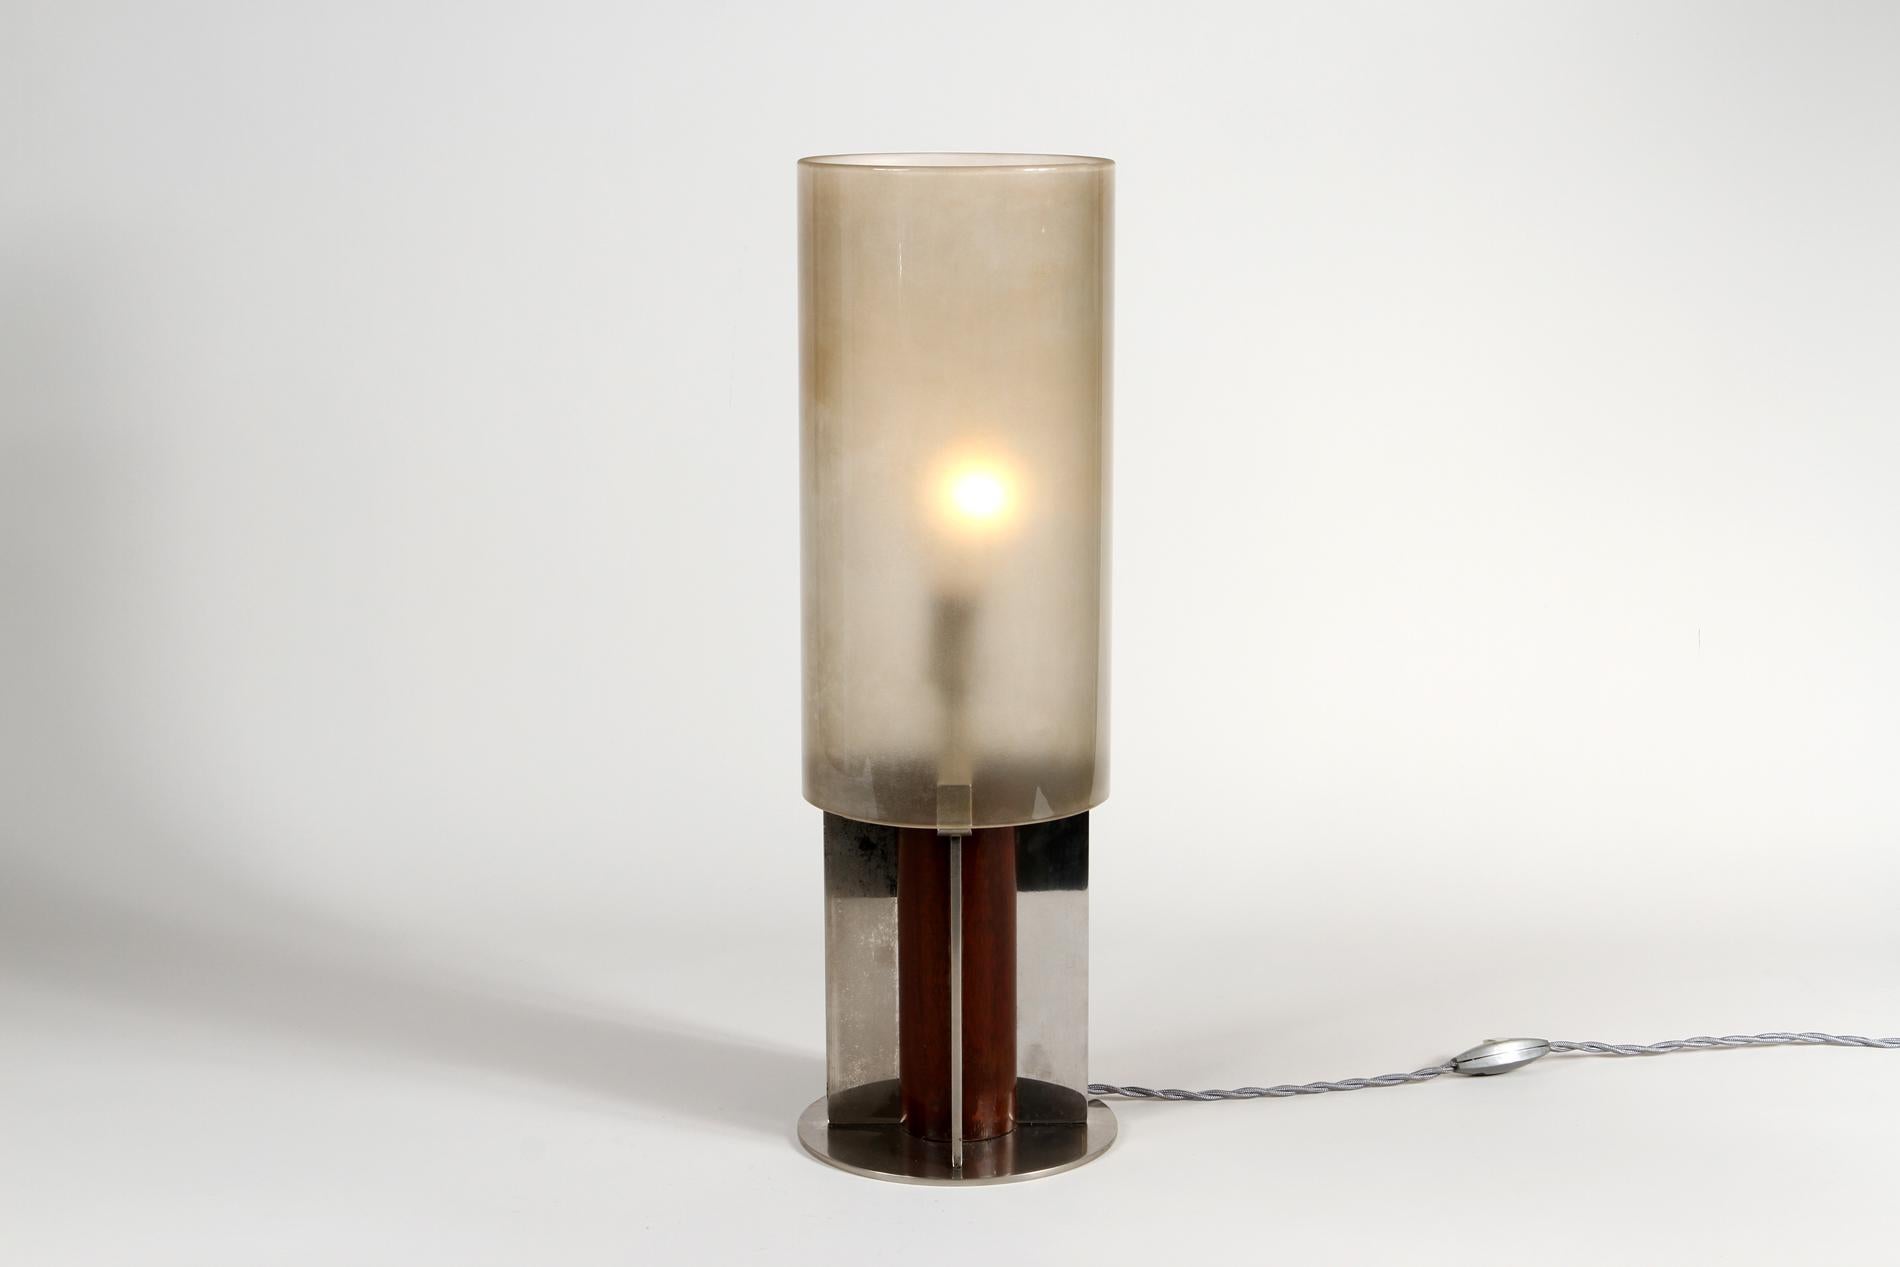 French Art Deco table lamp by Boris Lacroix. The lamp is with its original glass, the base is in nickeled bronze and wood and the signature is on the base. Really rare piece, has been rewired. 